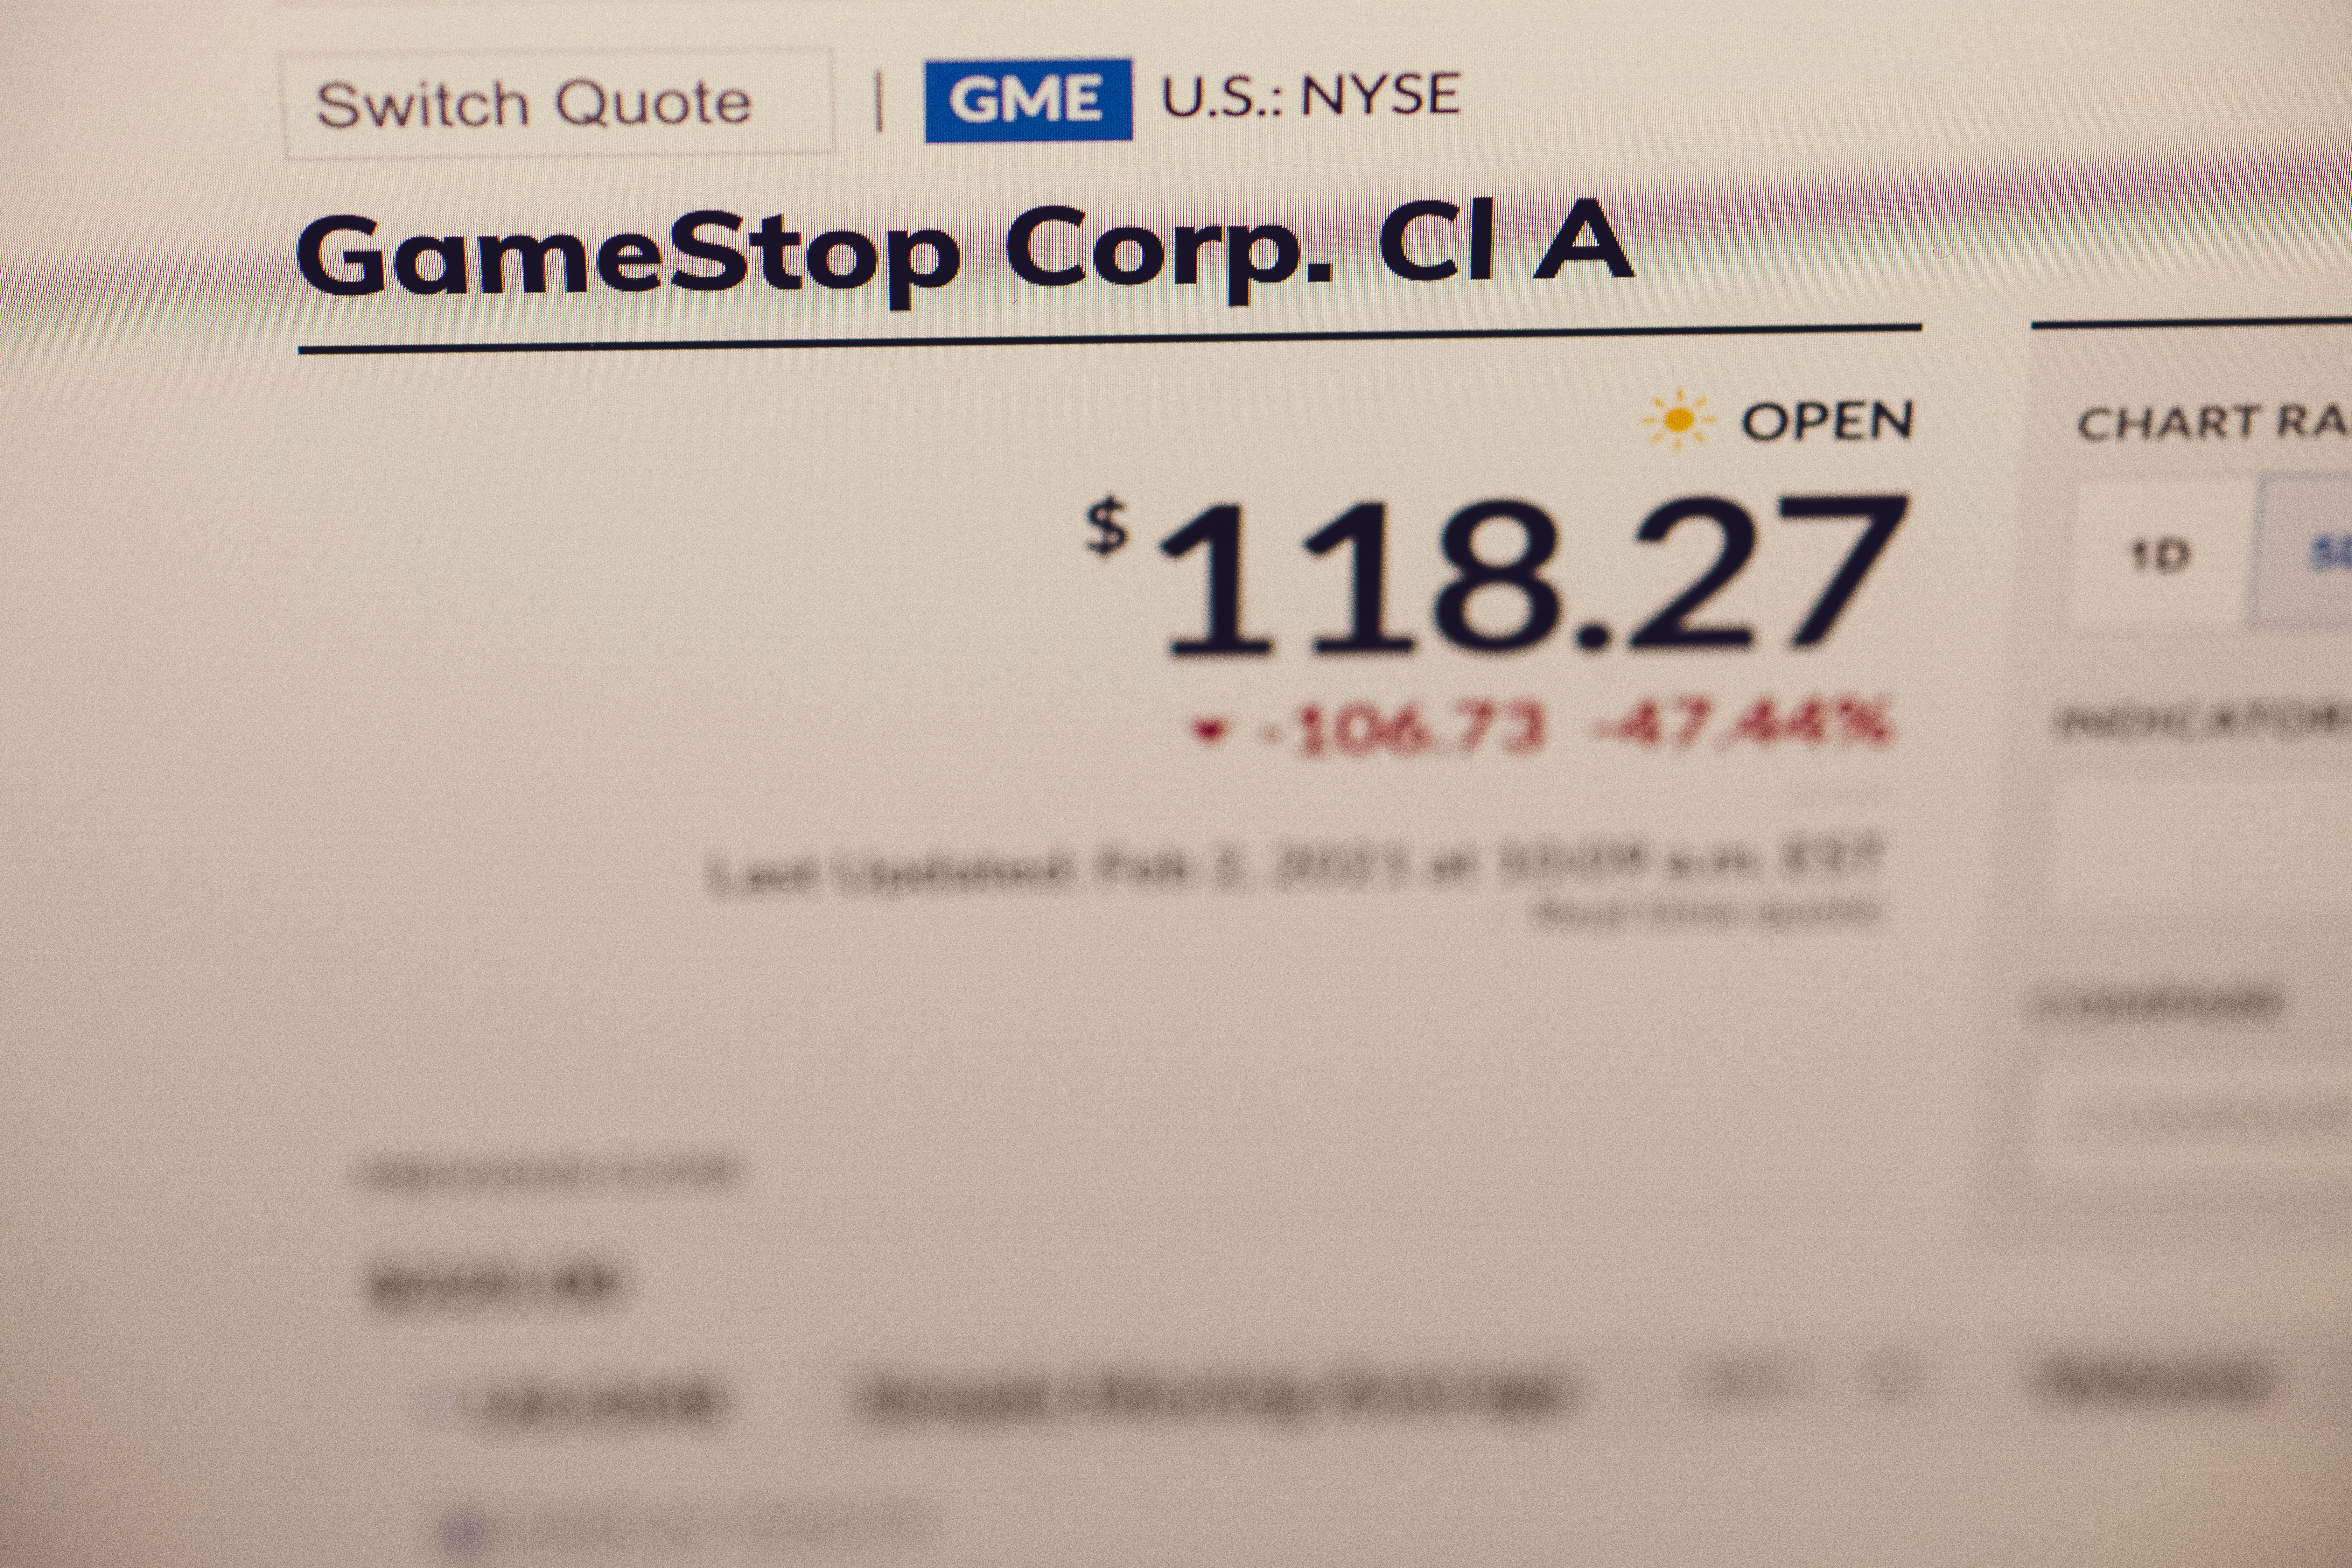 Will the Gamestop for interest markets?